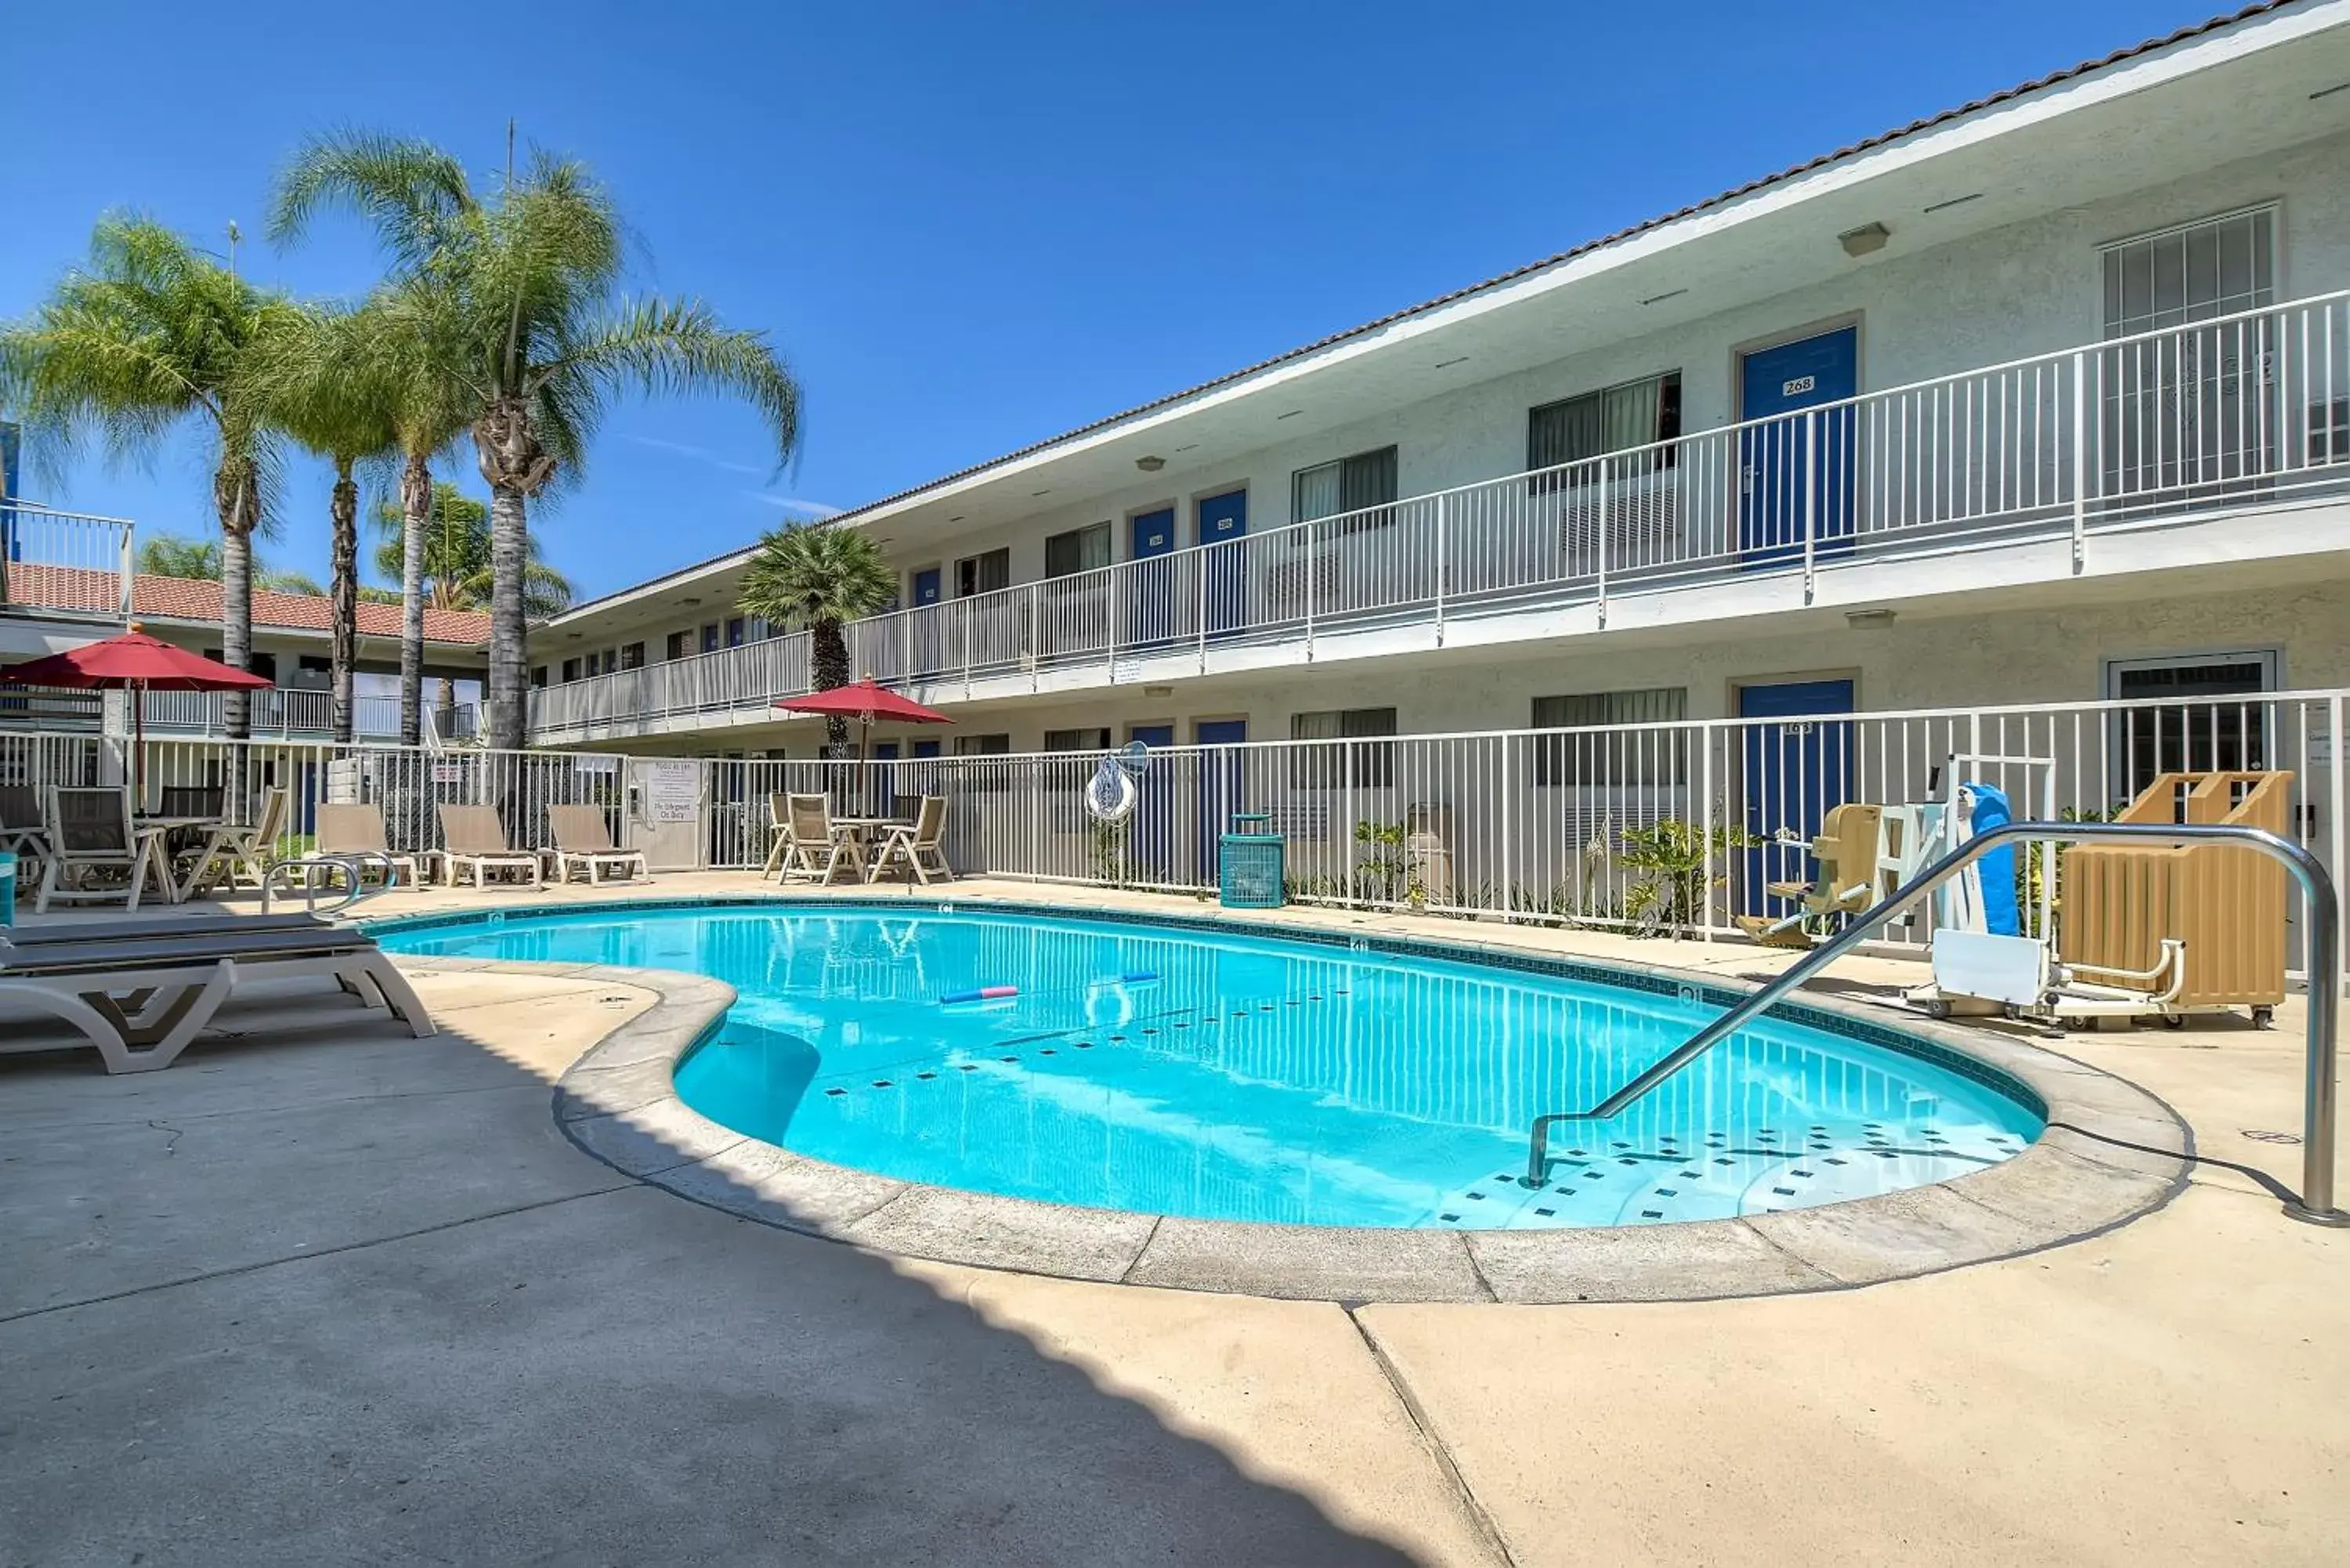 Property building, Swimming Pool in Motel 6-Rowland Heights, CA - Los Angeles - Pomona